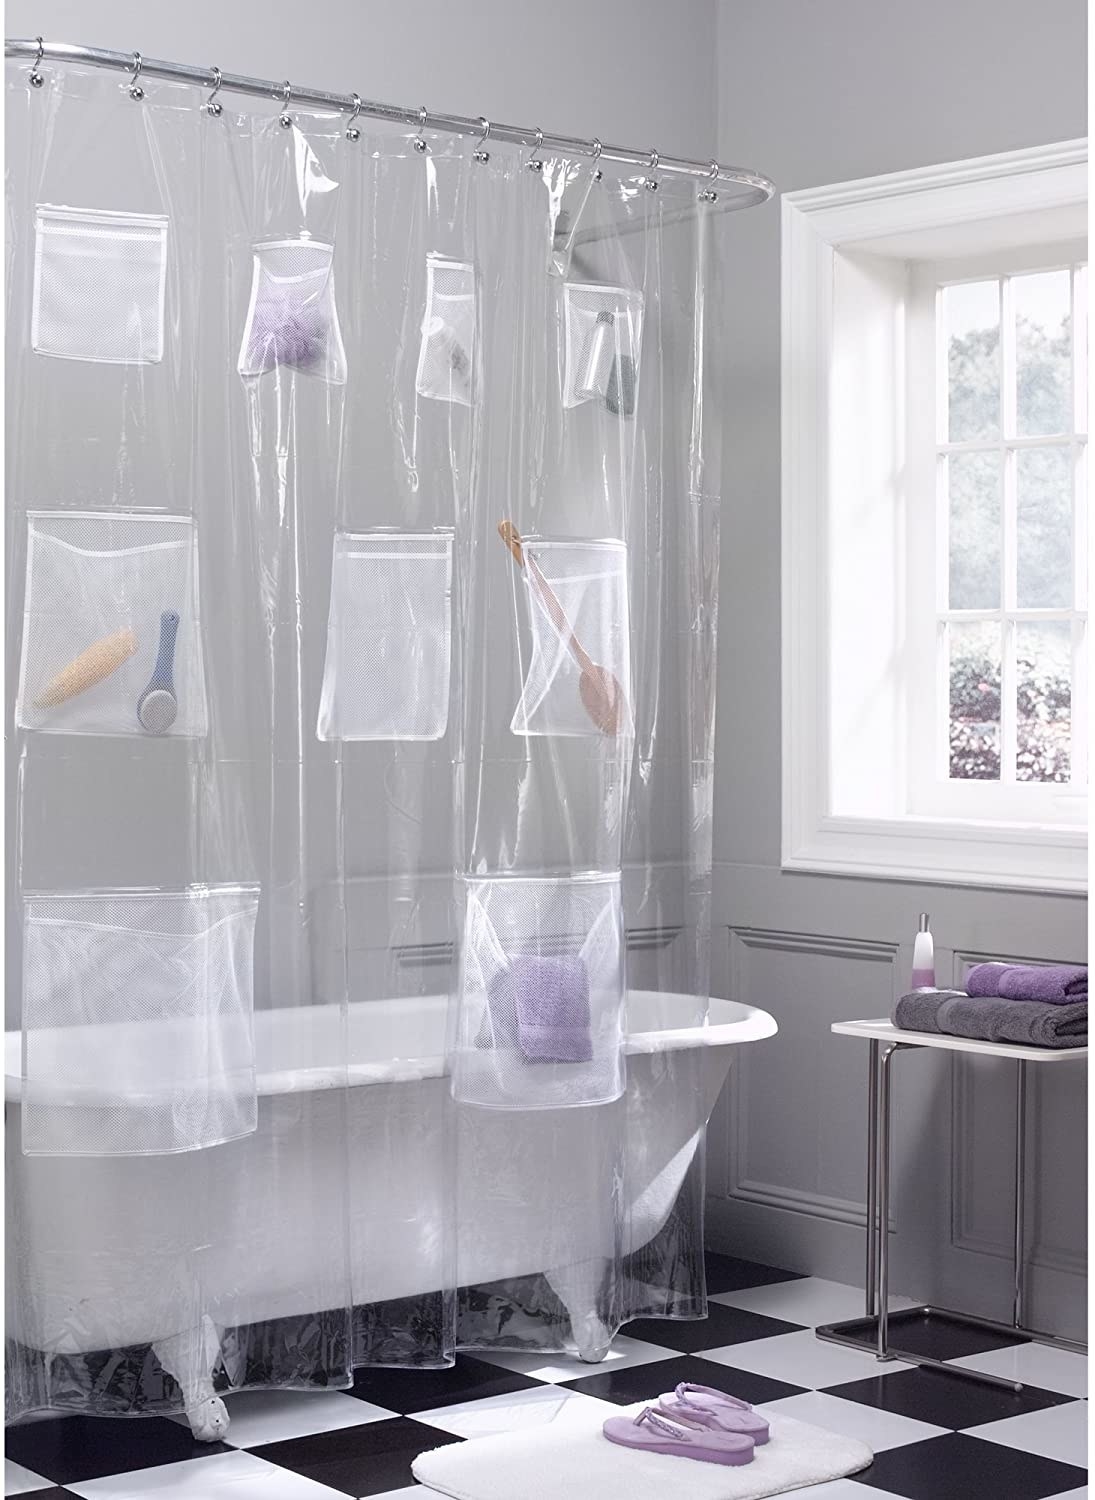 the shower curtain with pockets filled with brushes and bottles